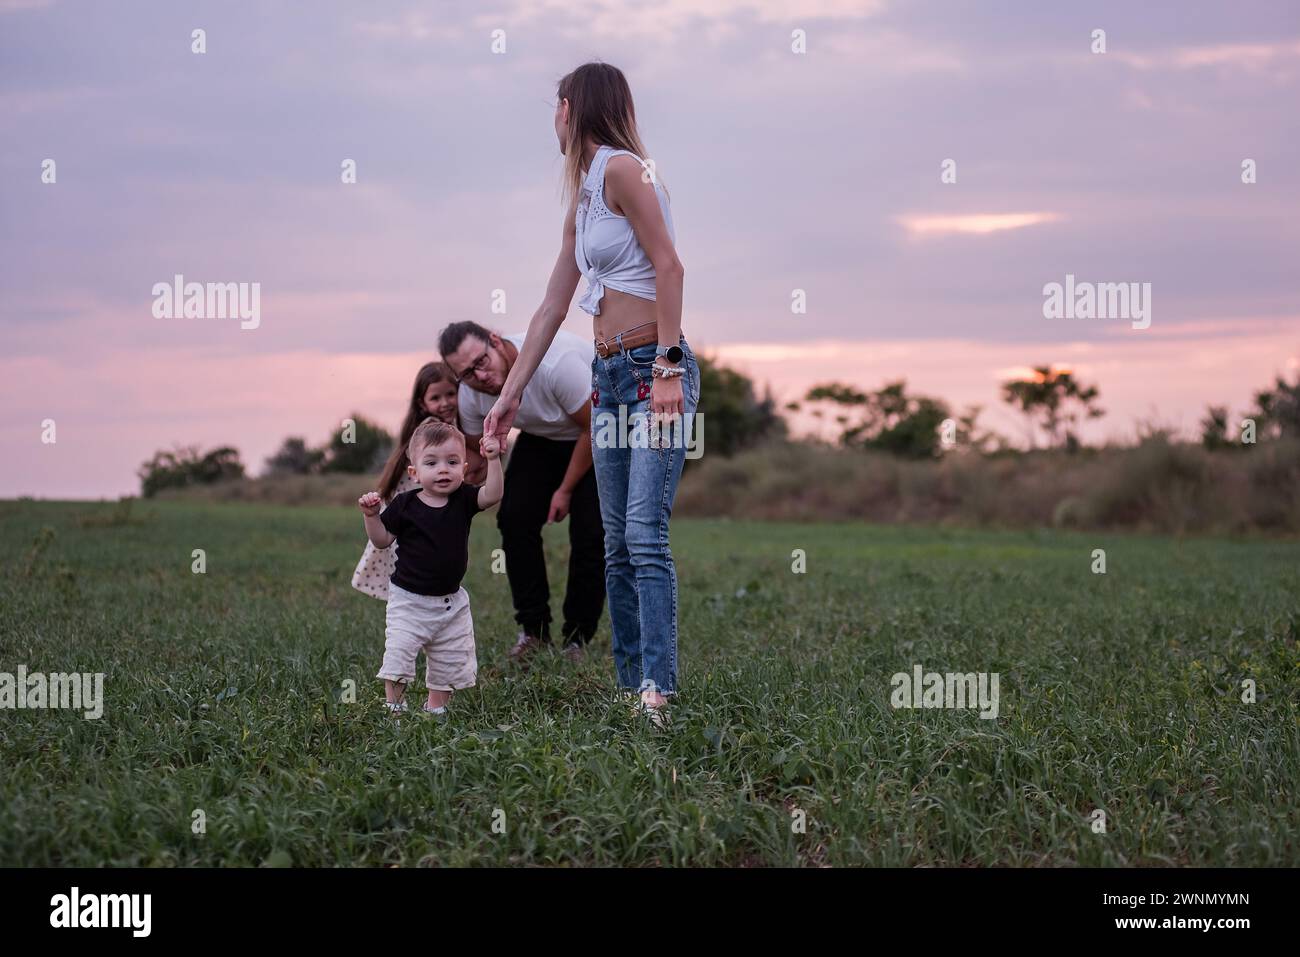 Woman helps toddler walk in a grassy field at sunset, with man and child in the background, capturing a casual, loving diversity family moment in the Stock Photo